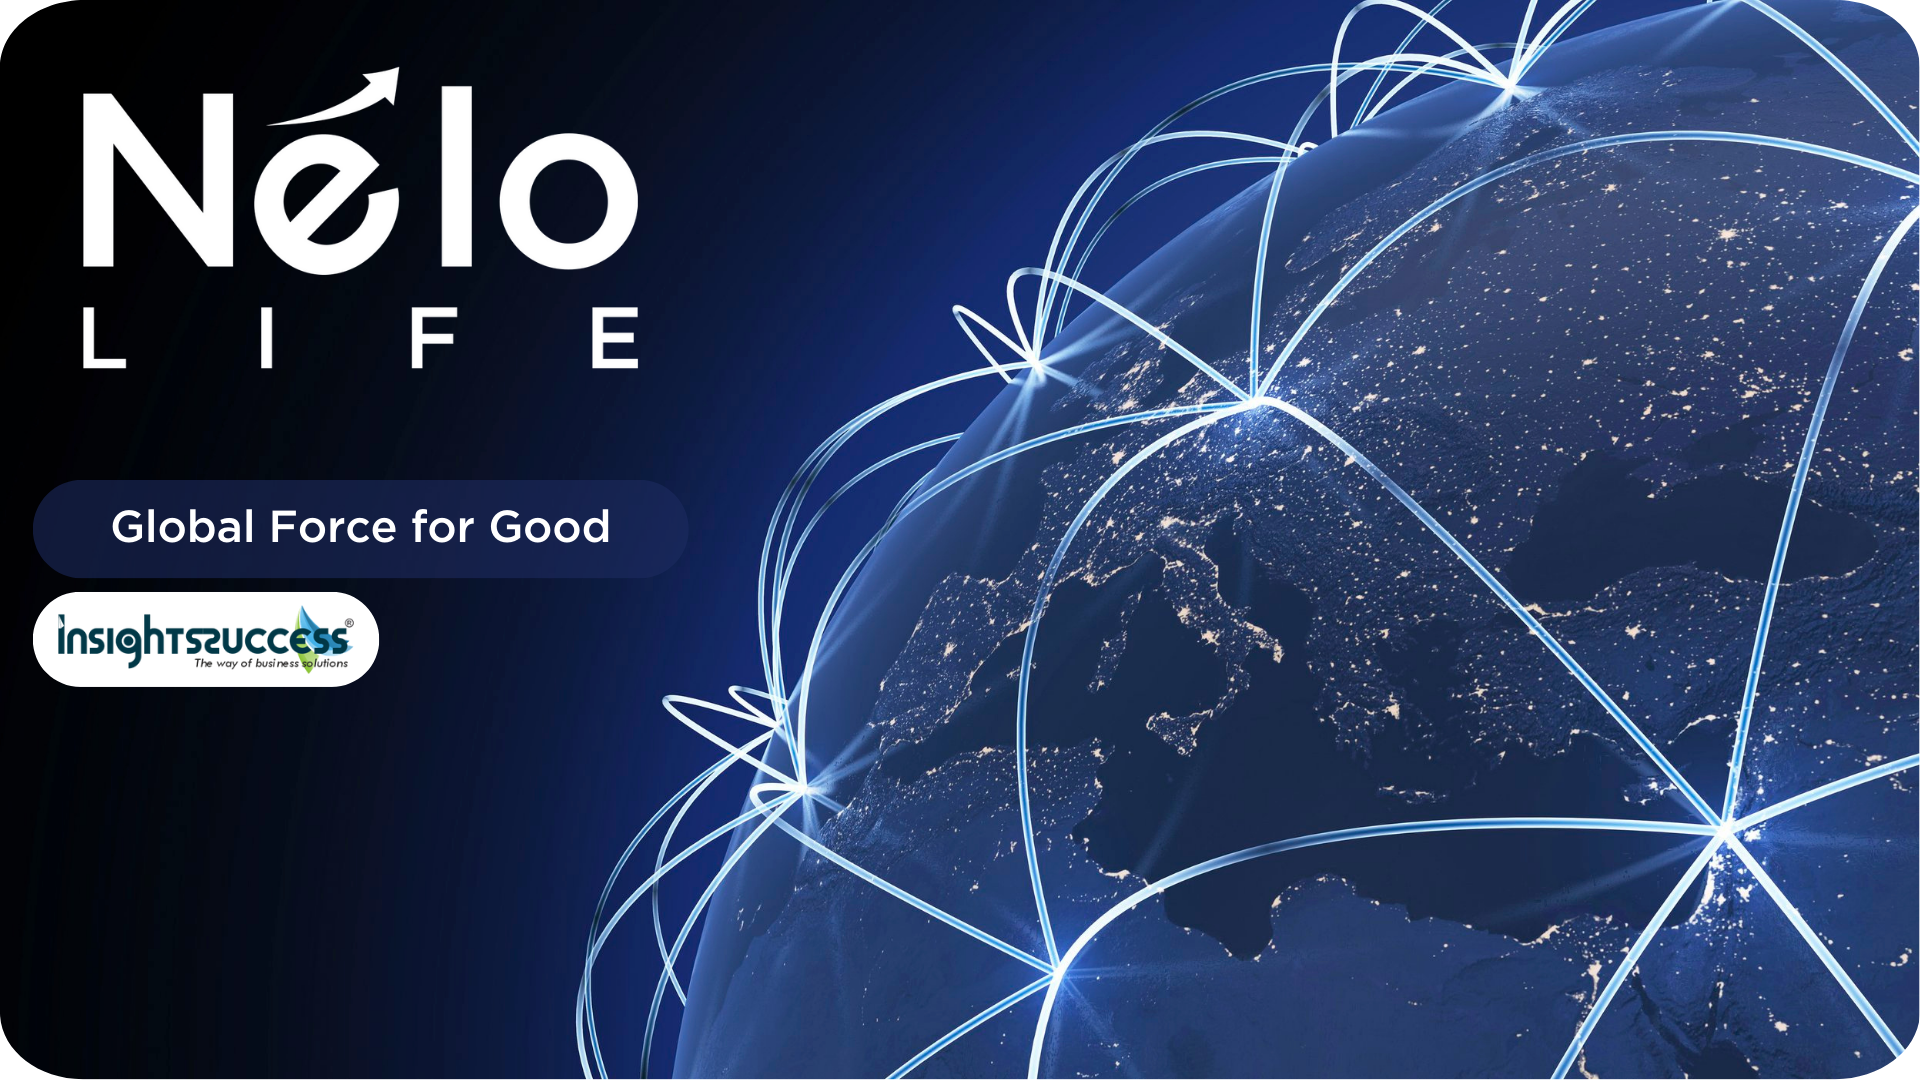 Nelo Life Lifestyle Membership Company Is a ‘Global Force for Good,’ Founders Say